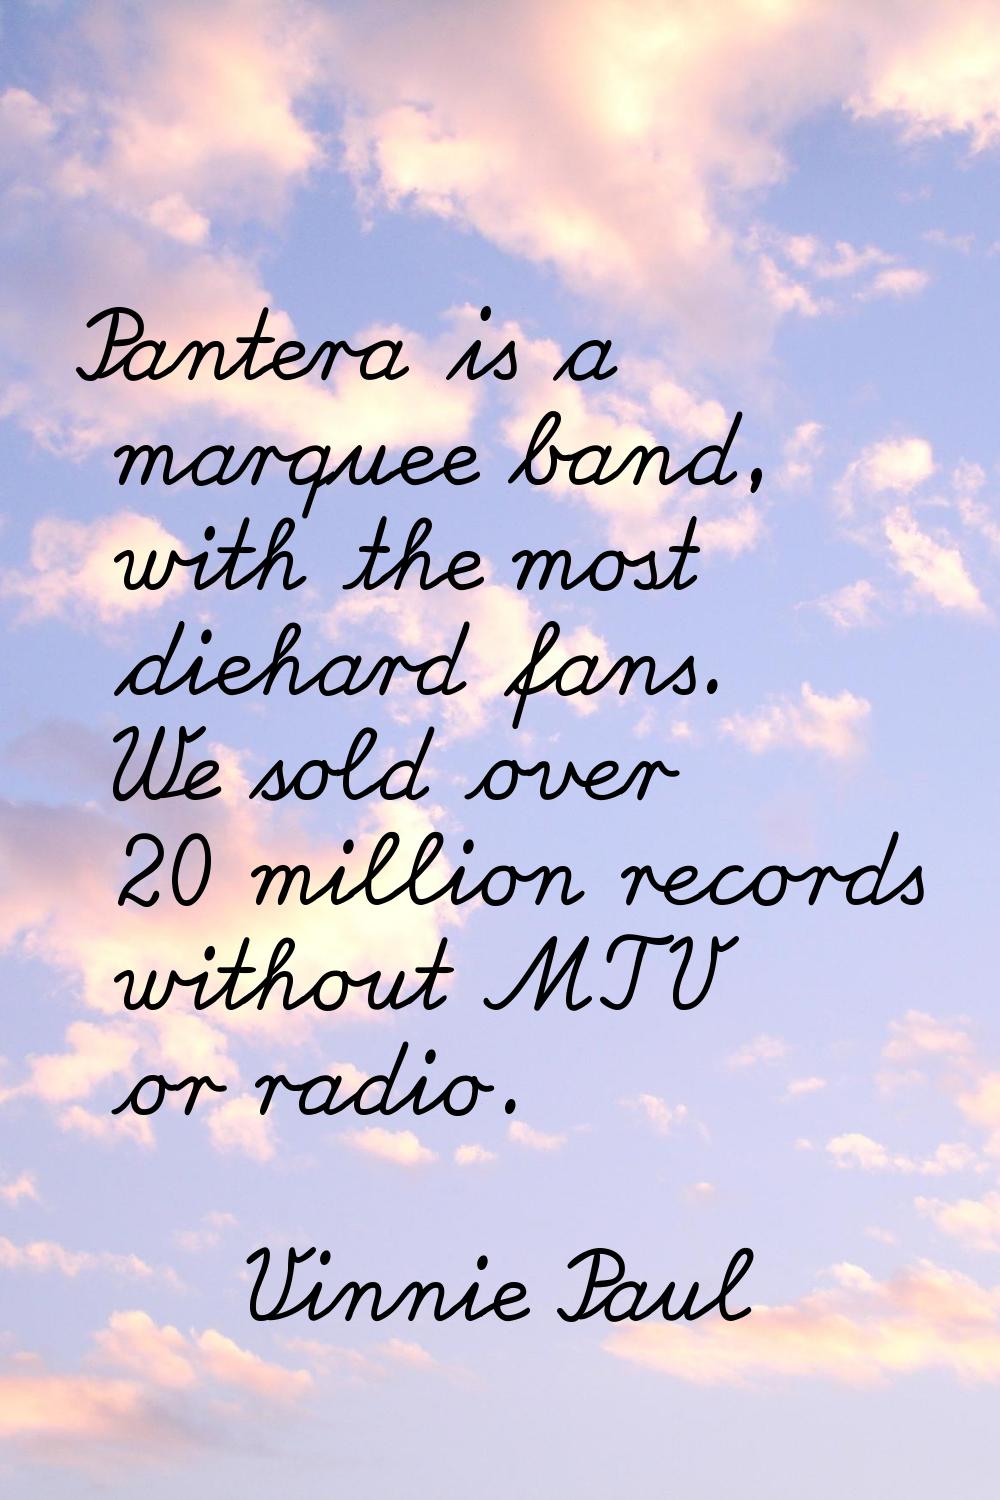 Pantera is a marquee band, with the most diehard fans. We sold over 20 million records without MTV 